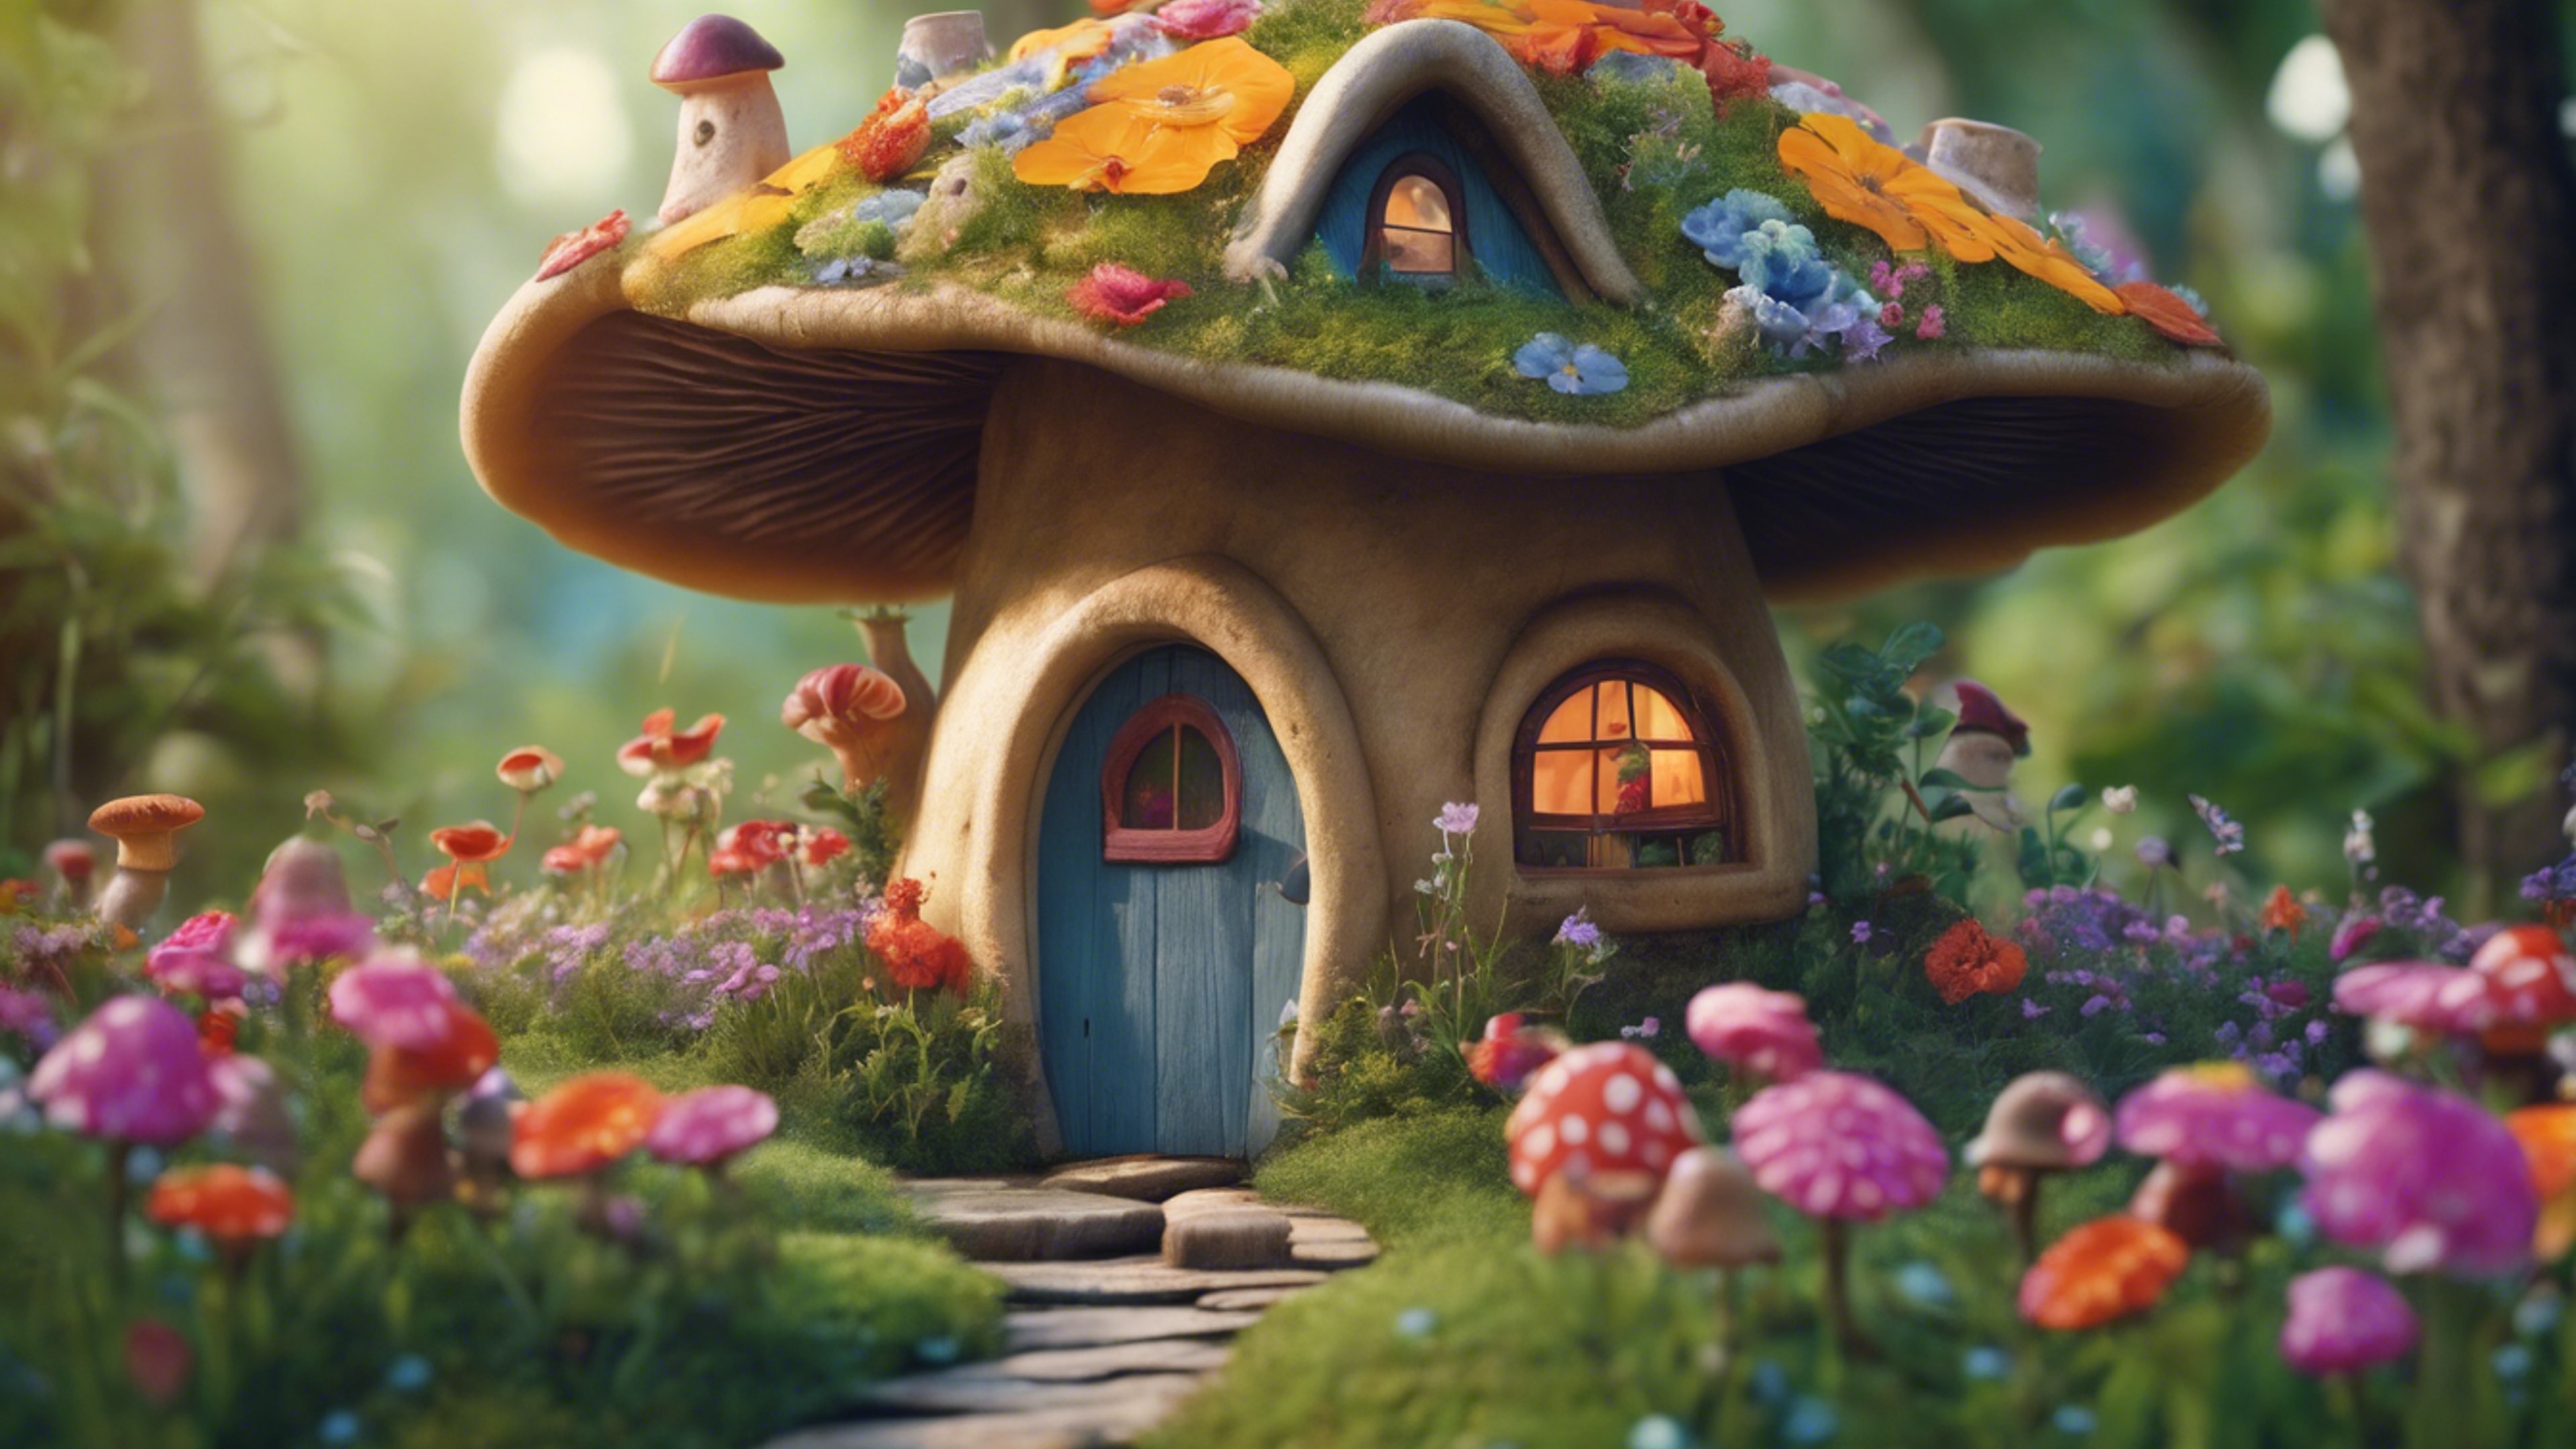 An old-fashioned, whimsical mushroom house, straight out of a children's storybook, nestled amid colorful flowers at the end of a winding path.壁紙[bbbff29f860842789321]